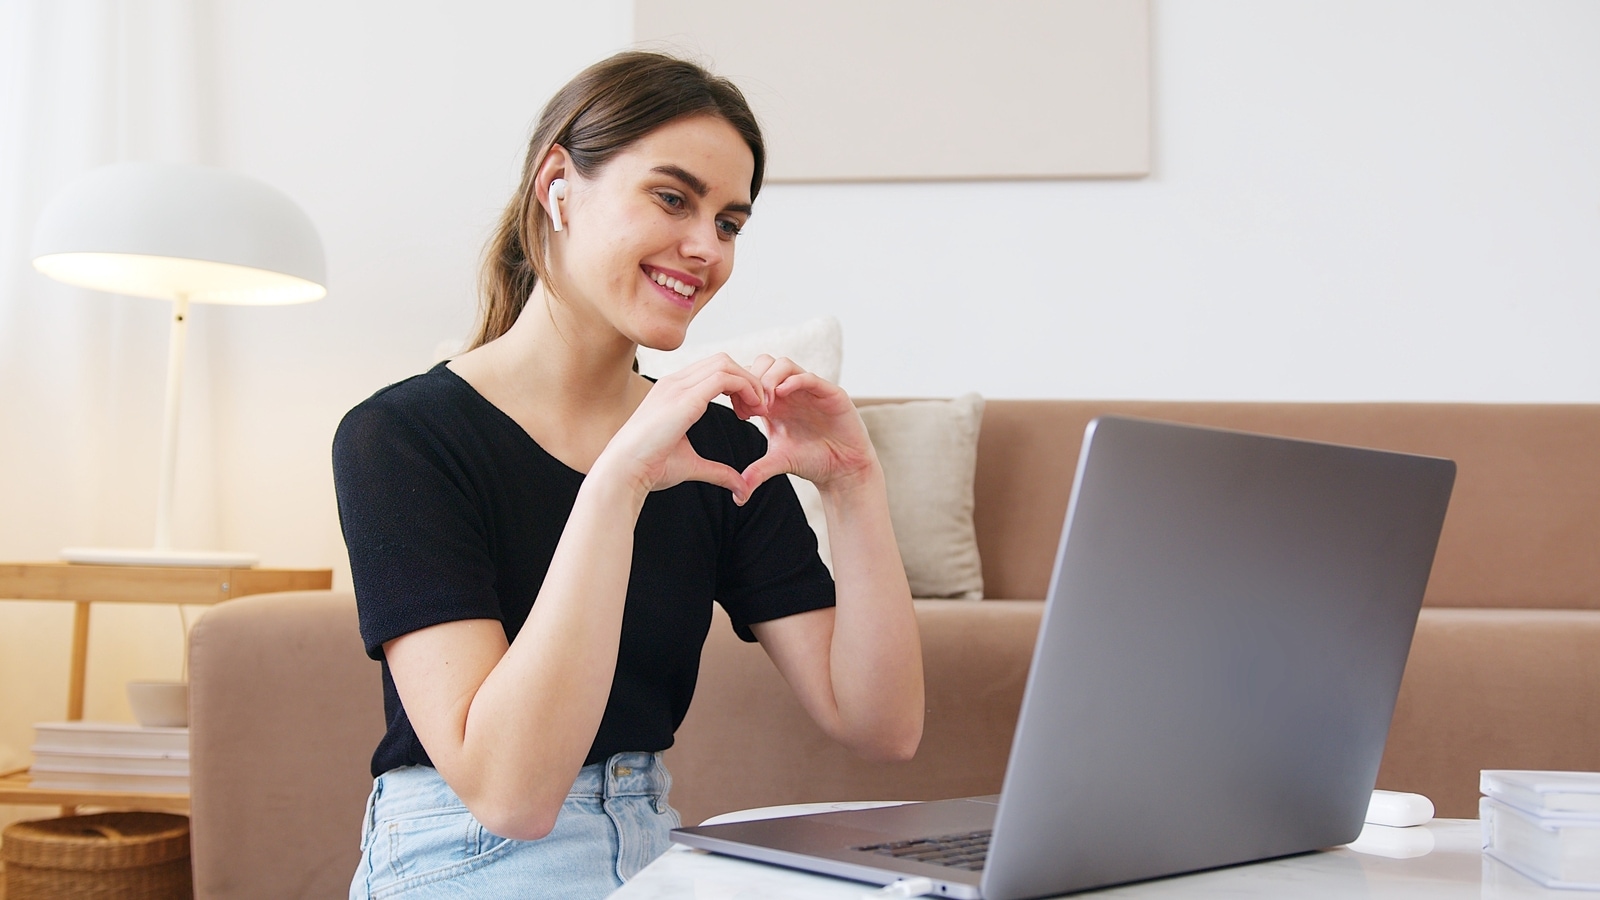 4 Tips for Maintaining a Healthy Long-Distance Relationship - One